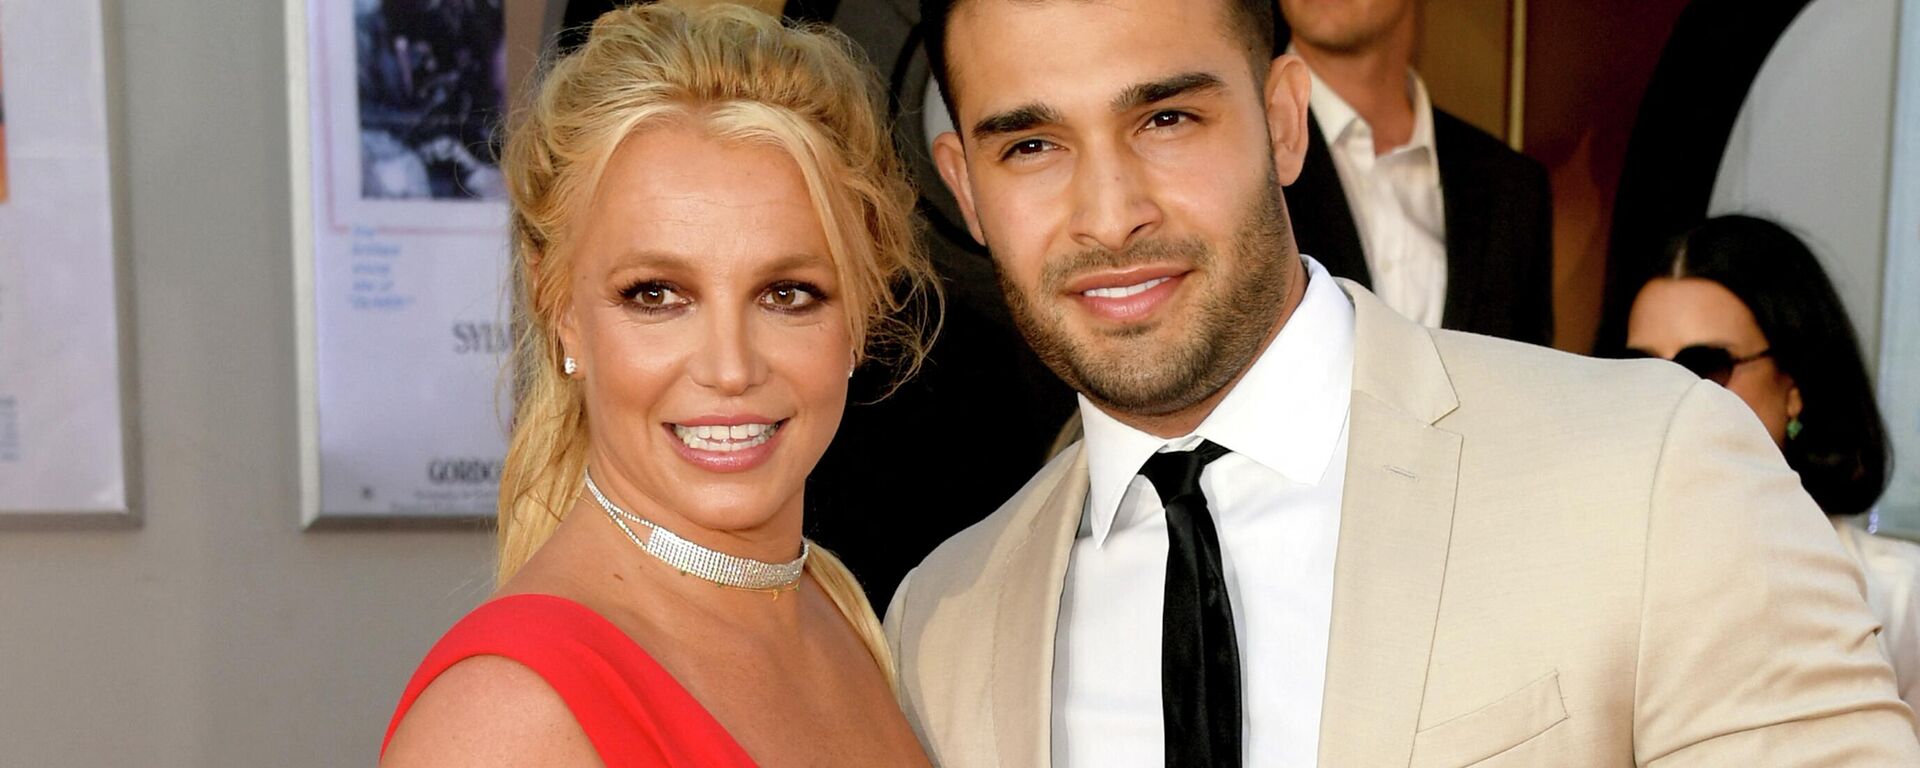 Britney Spears and Sam Asghari arrive at the premiere of Sony Pictures' One Upon A Time...In Hollywood at the Chinese Theatre on July 22, 2019 in Hollywood, California.   - Sputnik International, 1920, 11.06.2022